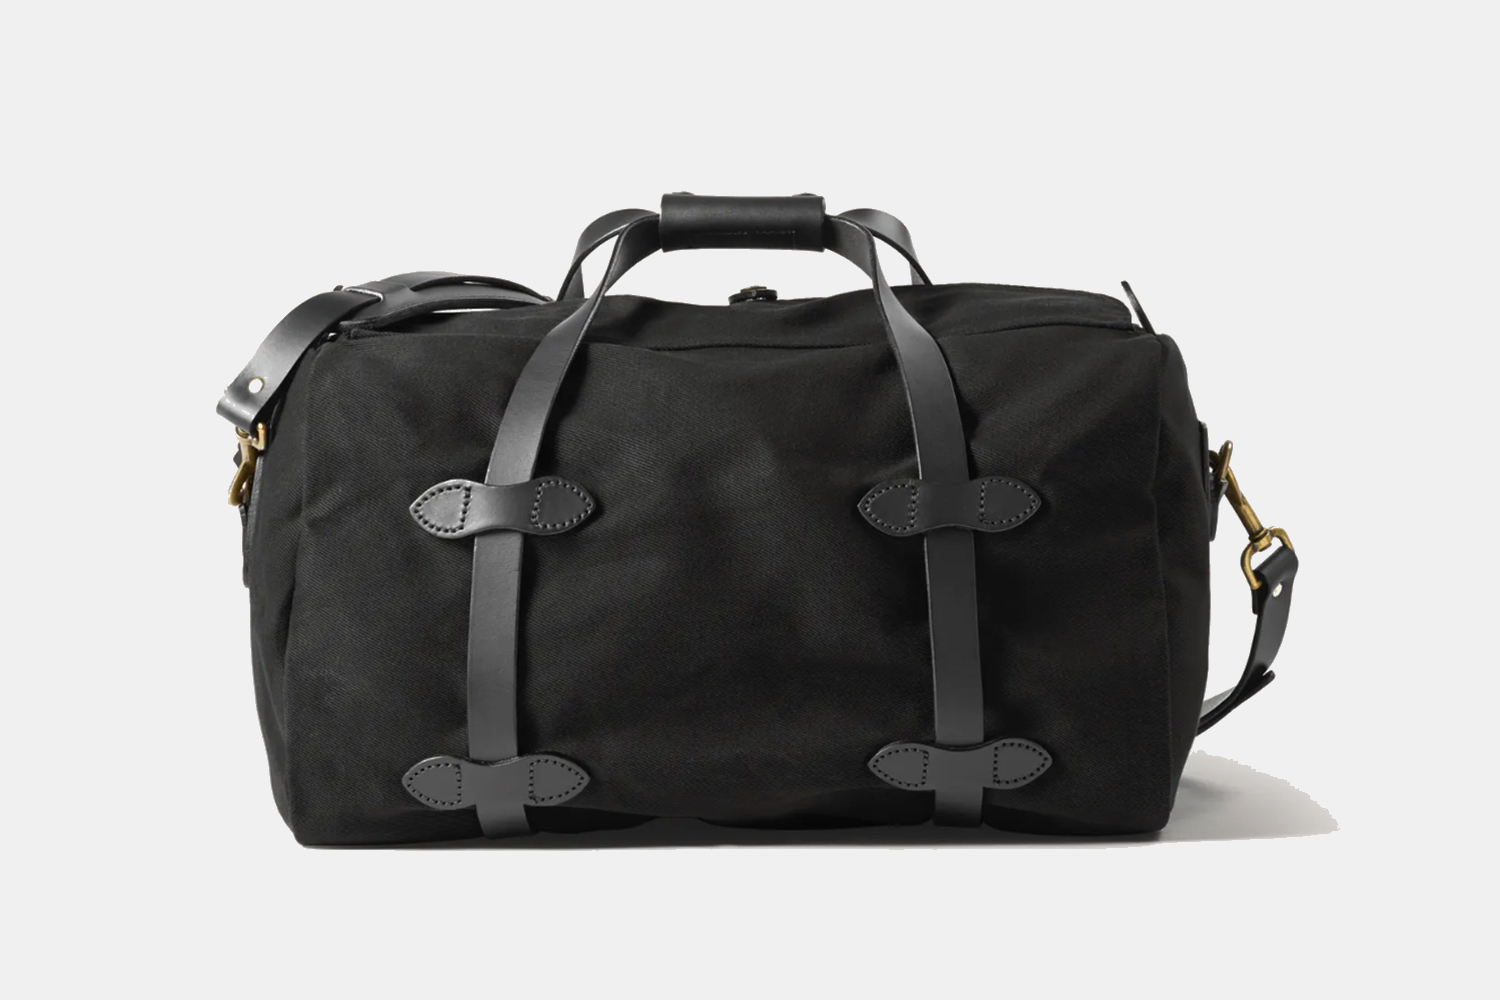 Deal: This Perfect Travel Bag From Filson Is on Sale